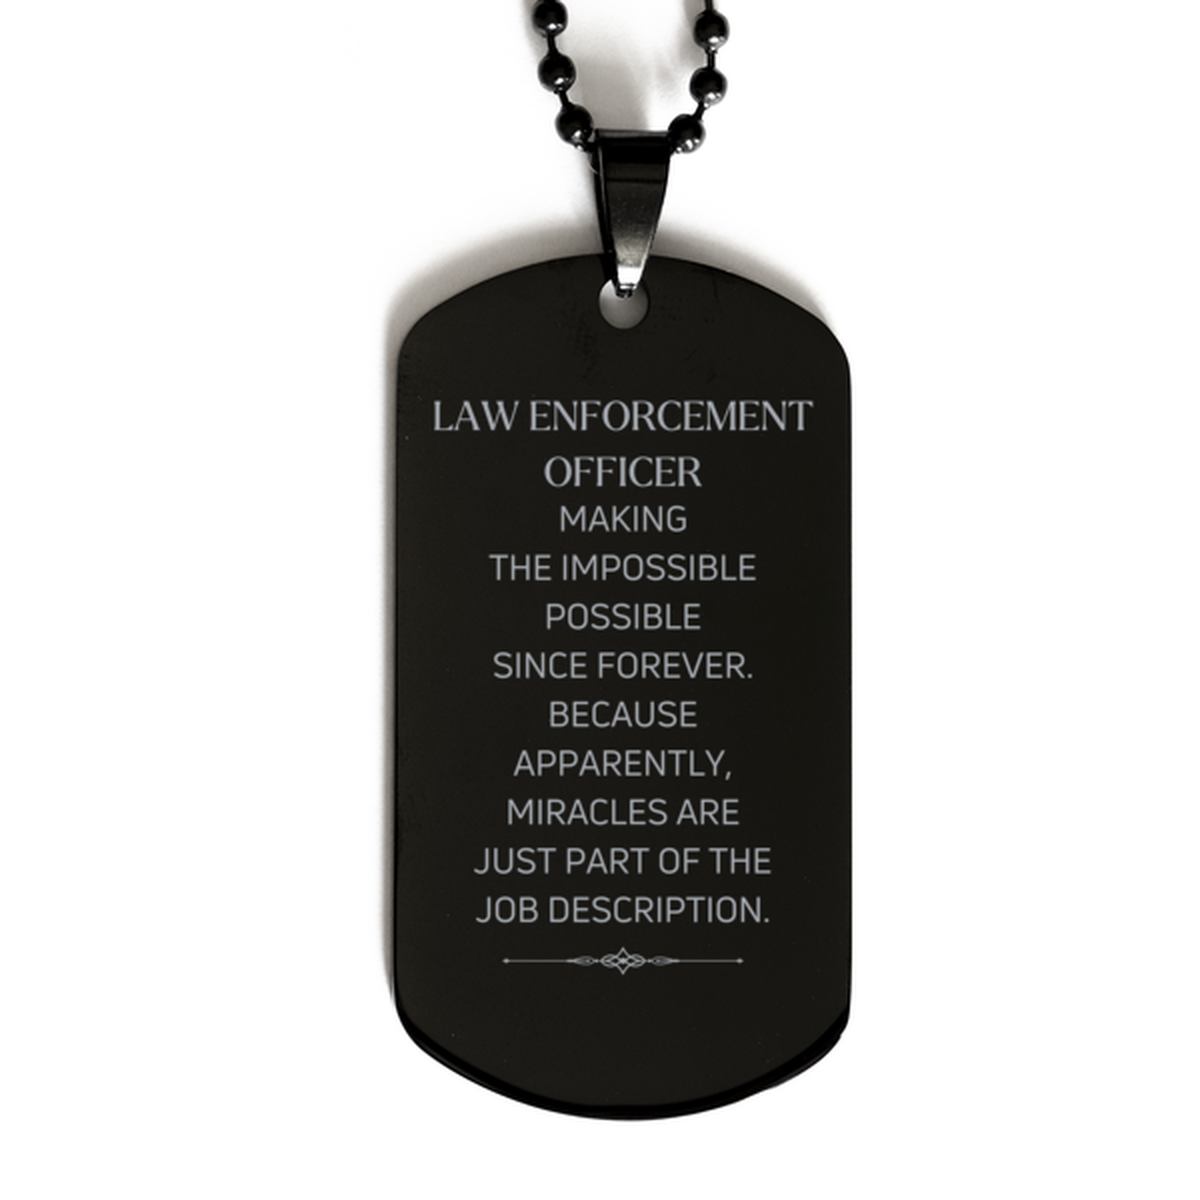 Funny Law Enforcement Officer Gifts, Miracles are just part of the job description, Inspirational Birthday Black Dog Tag For Law Enforcement Officer, Men, Women, Coworkers, Friends, Boss